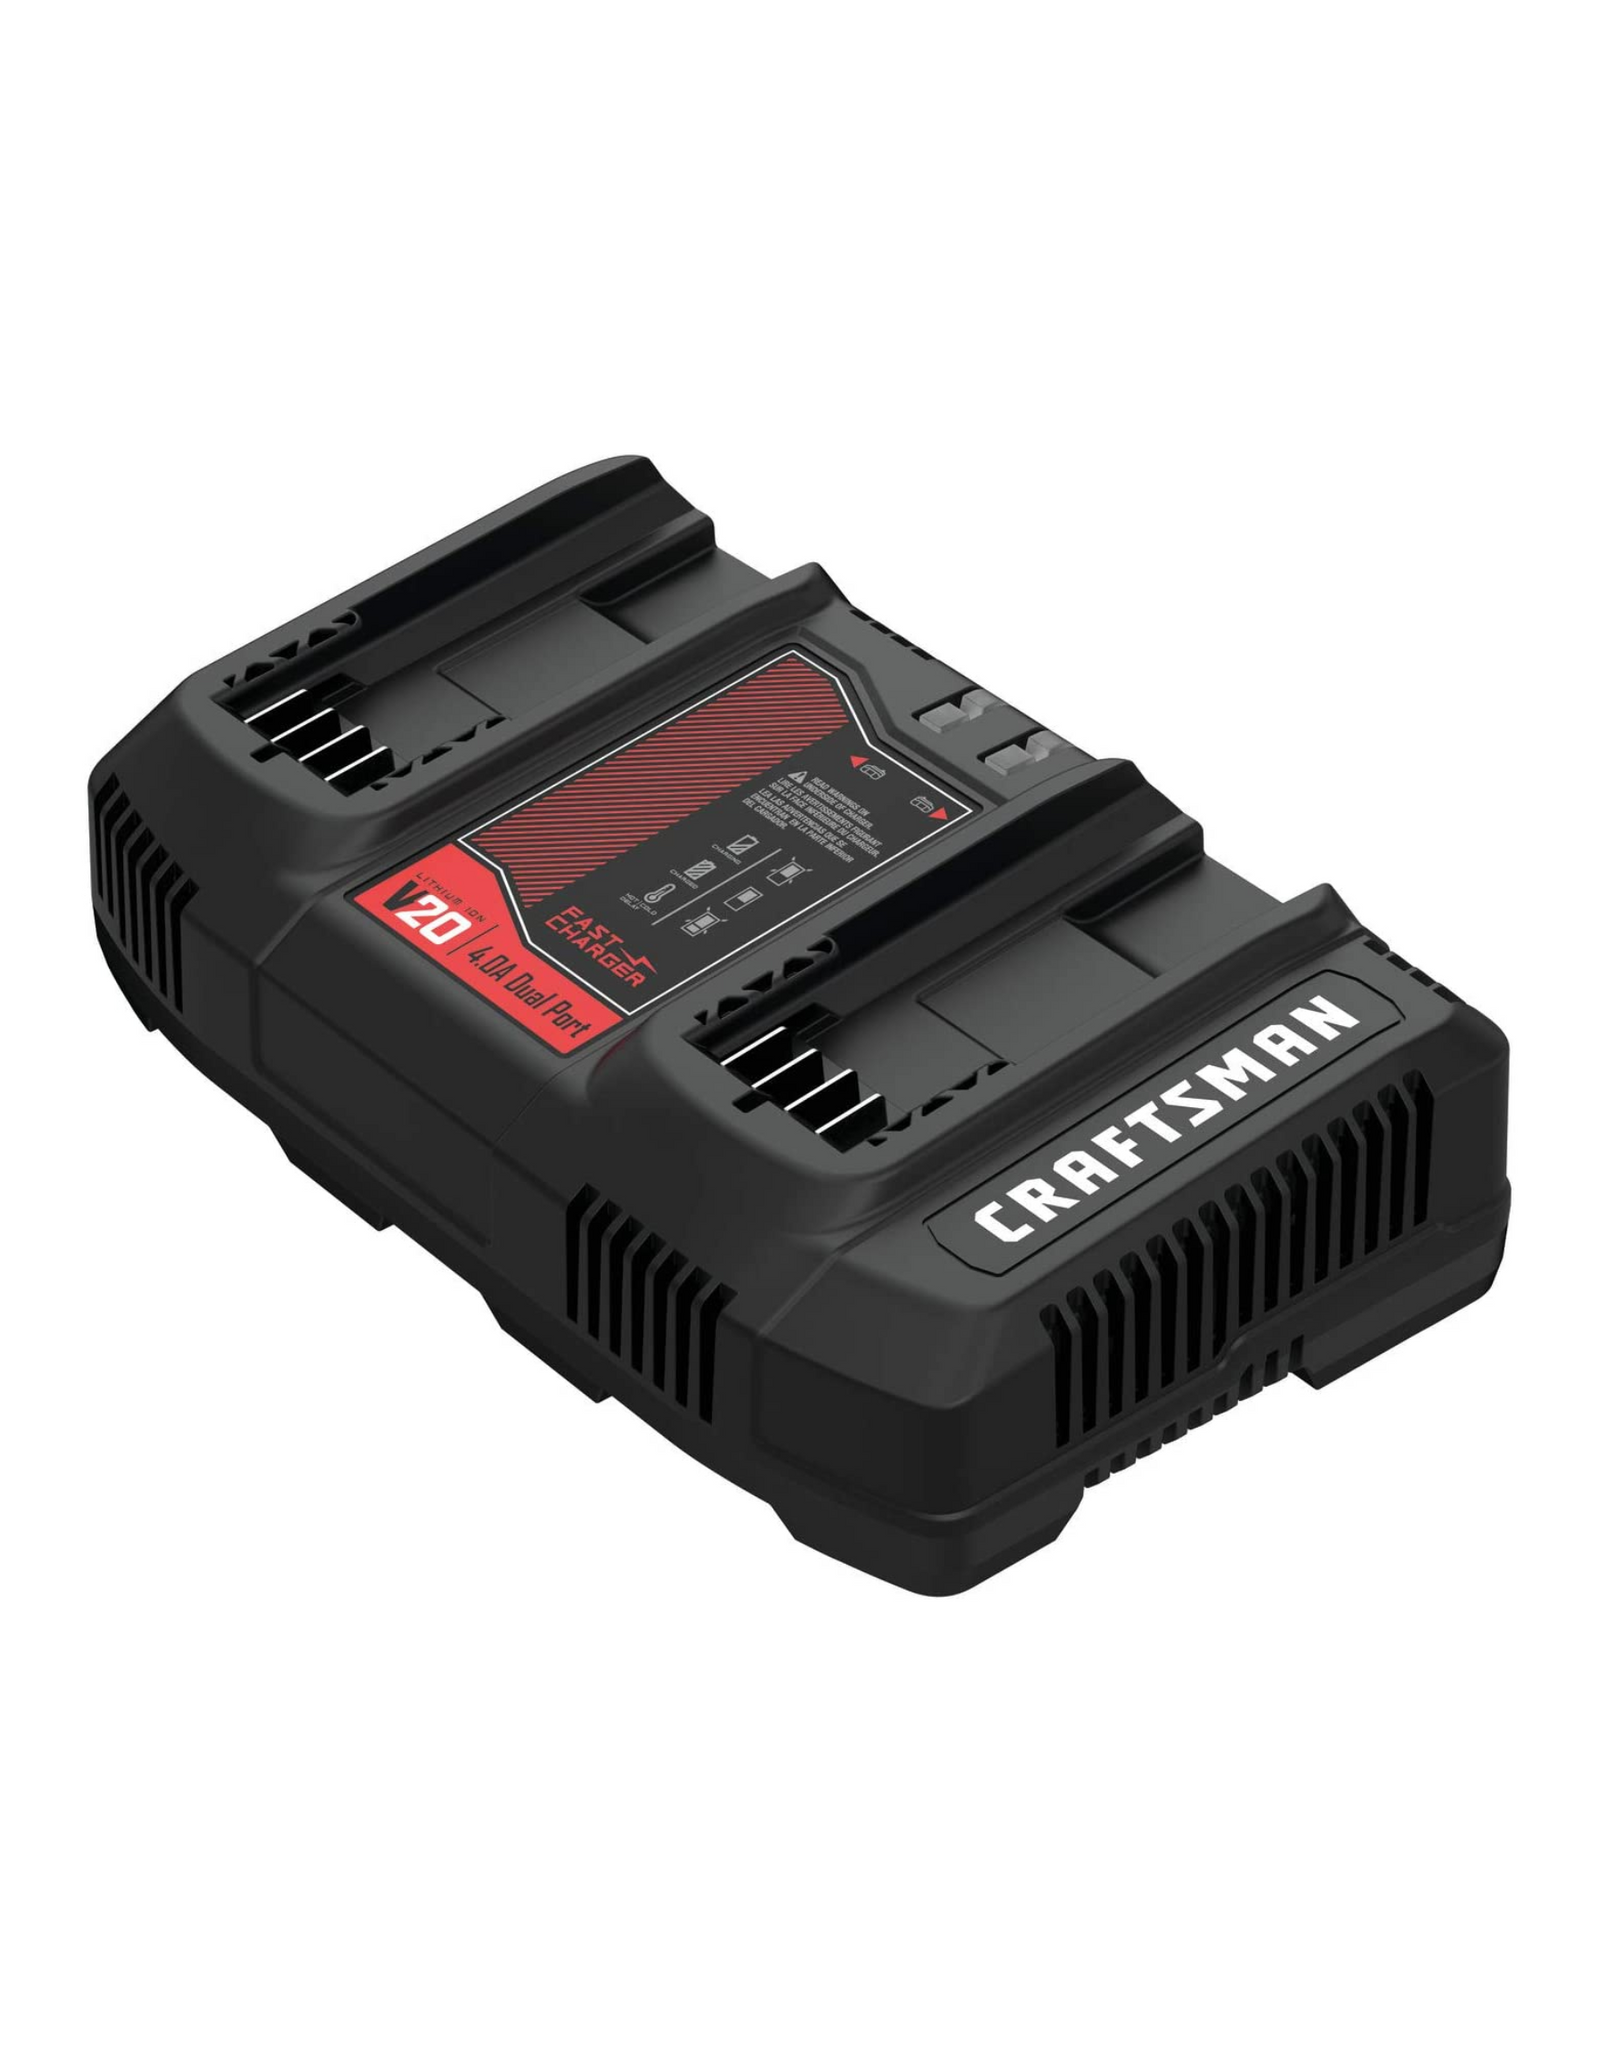 CRAFTSMAN 20V MAX* Battery Charger (CMCB124), Dual Port Charger